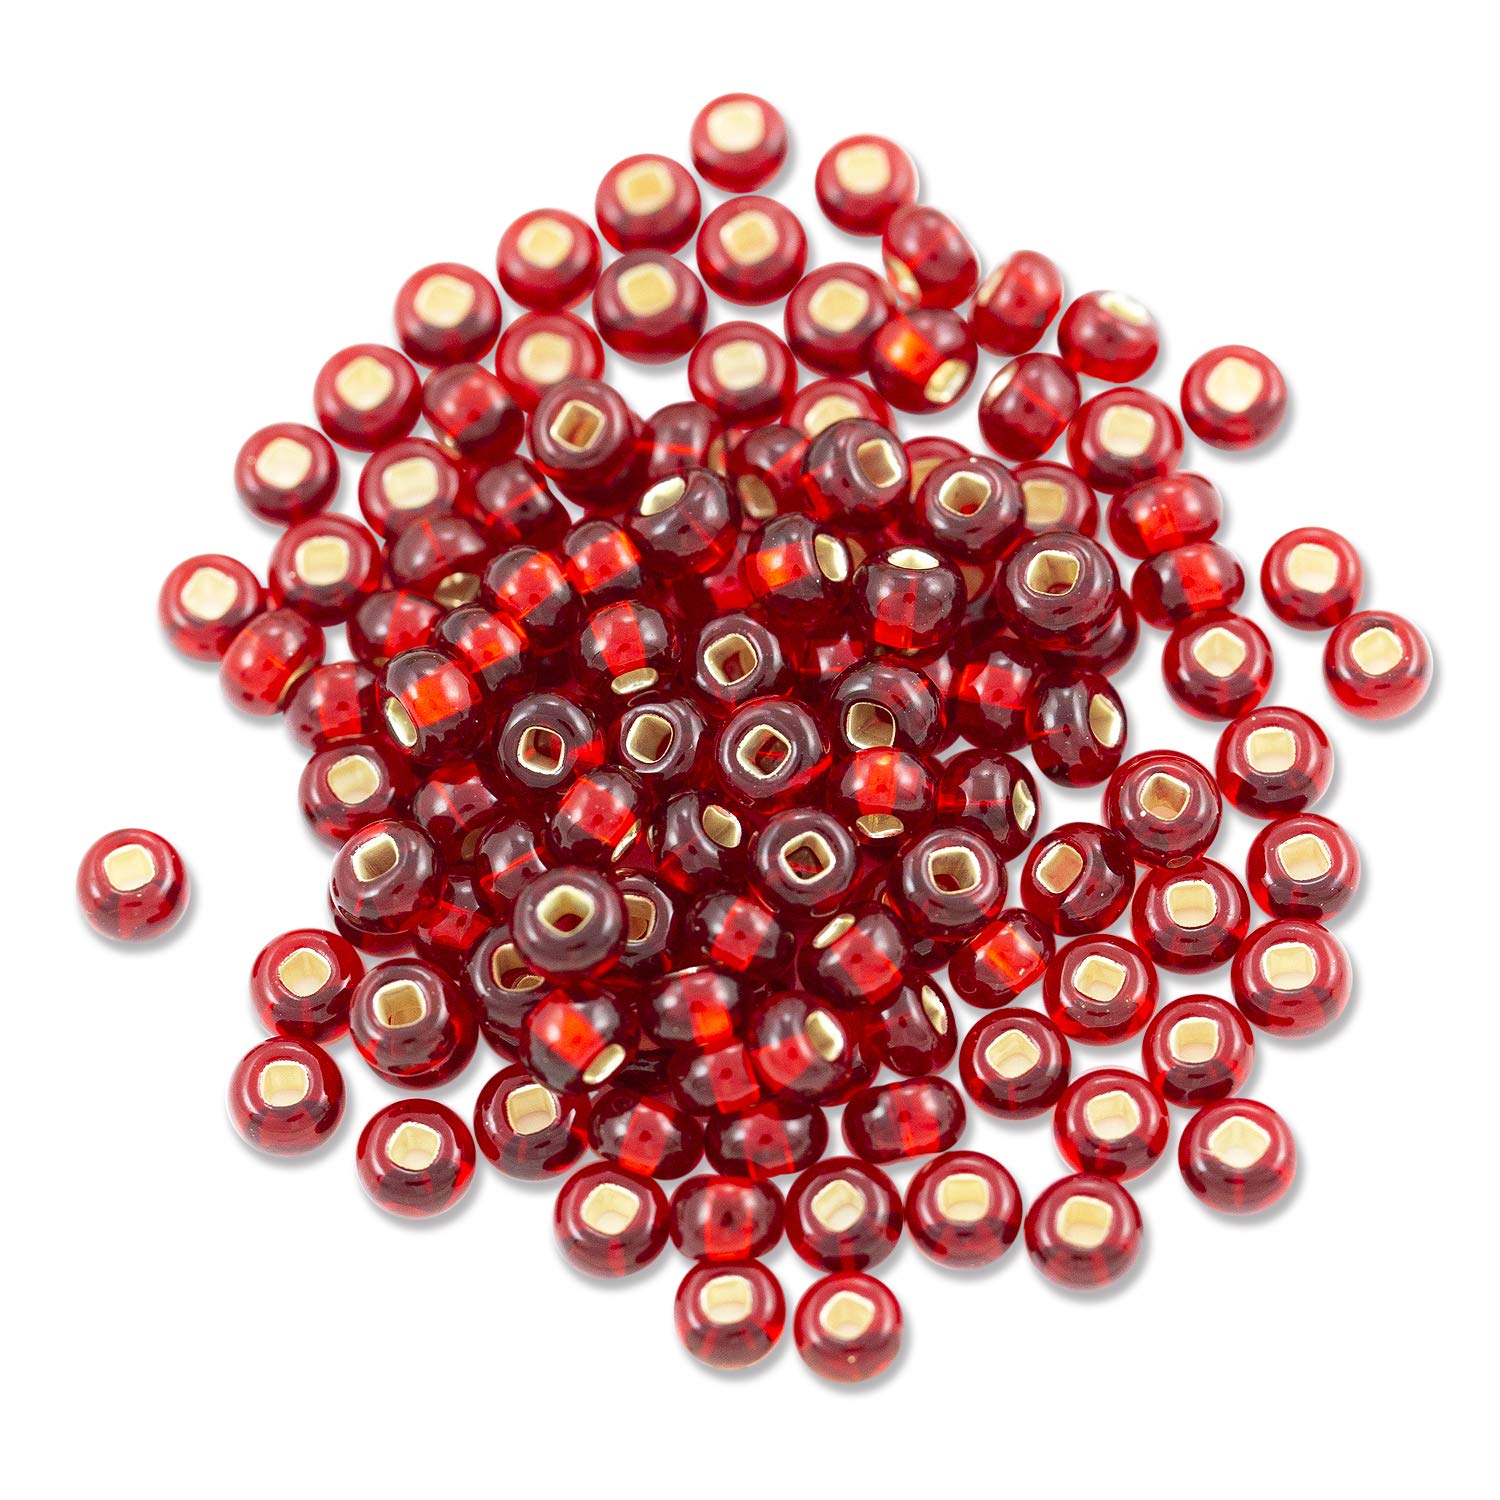 Czech Seed Bead 6/0 (4mm) Beads Silver Lined Ruby (10 Grams) Beads